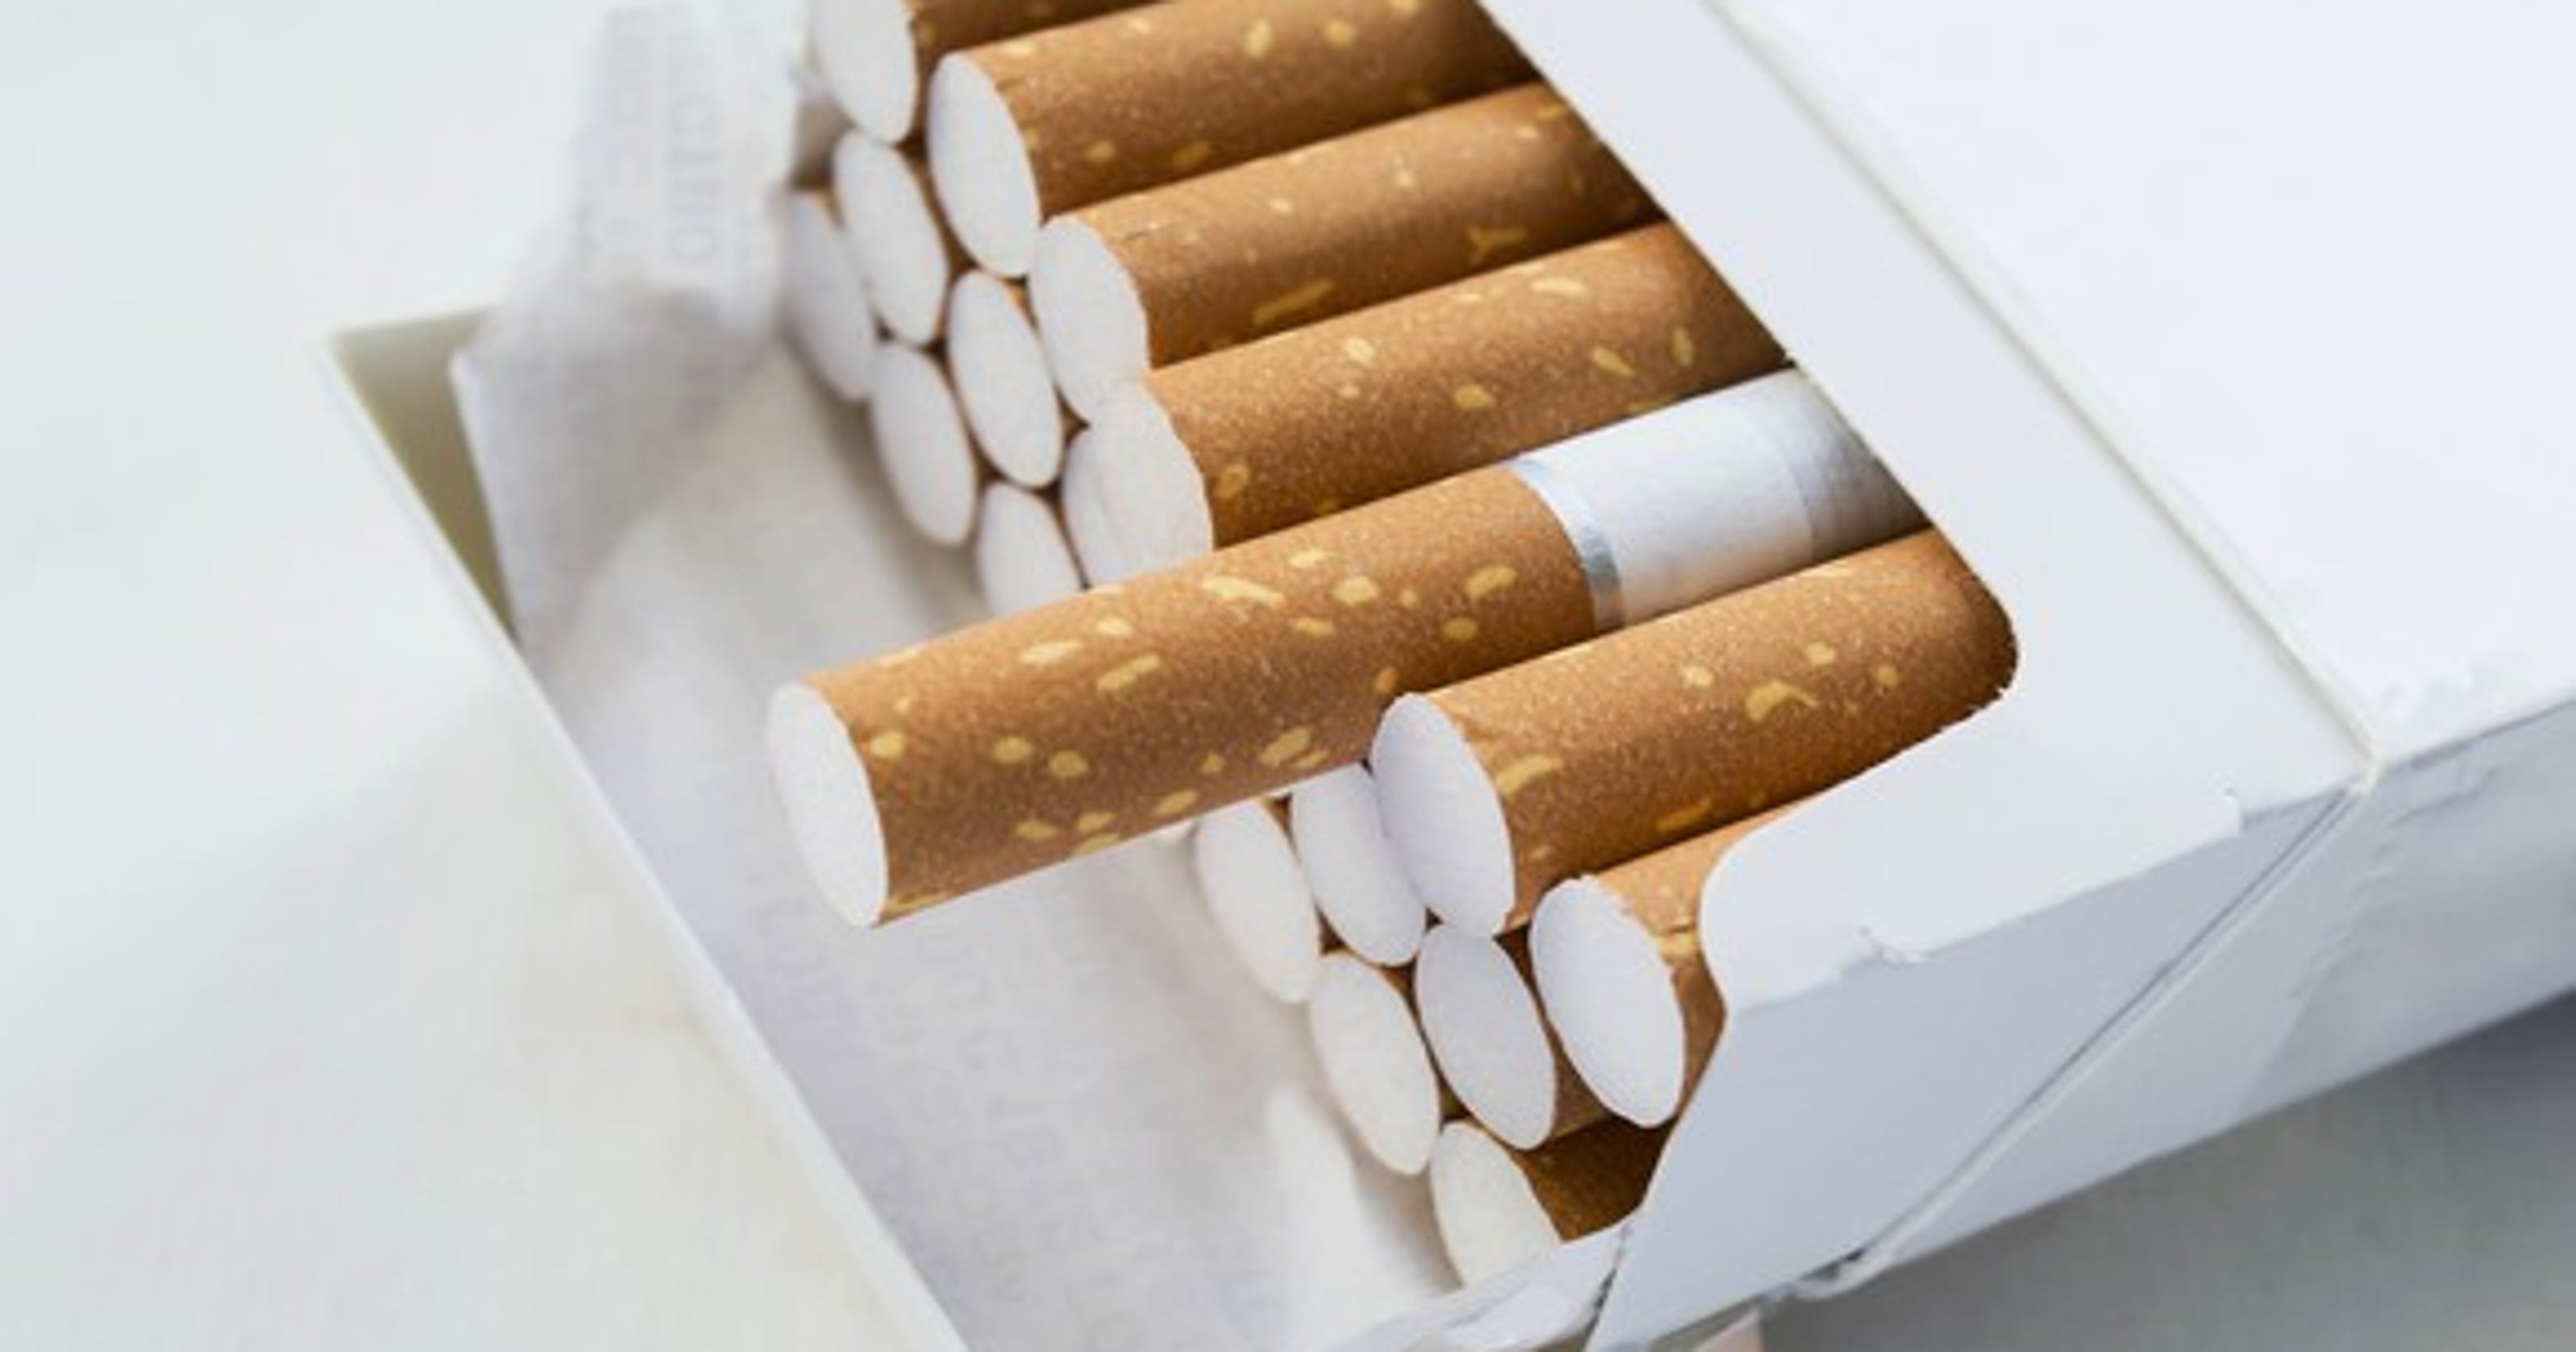 NYC hikes price of pack of cigarettes to $13, highest in U.S.